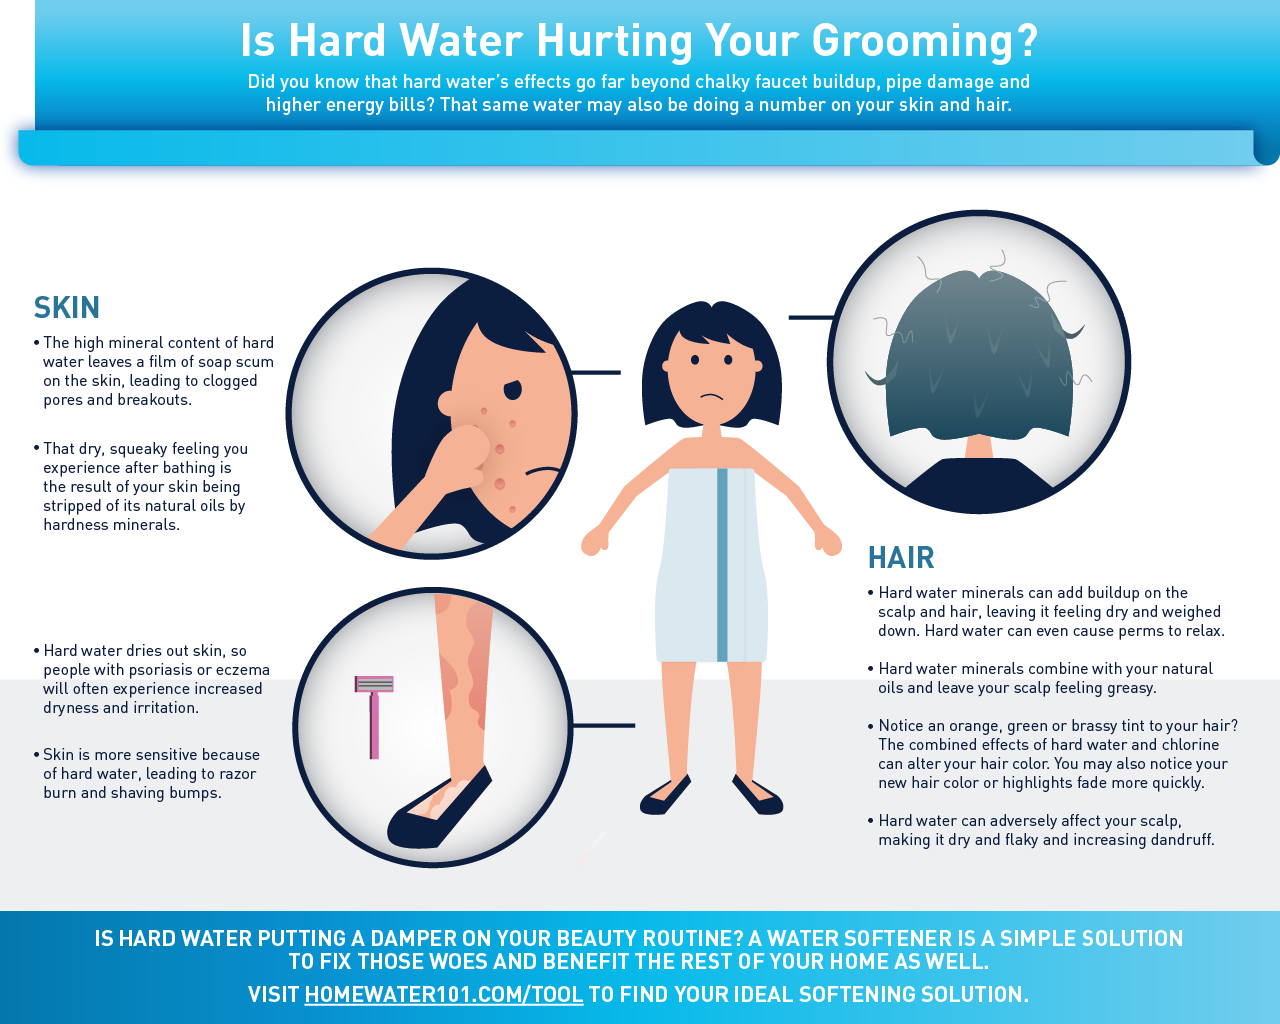 Hard Water's Effects on Hair and Skin | HomeWater 101